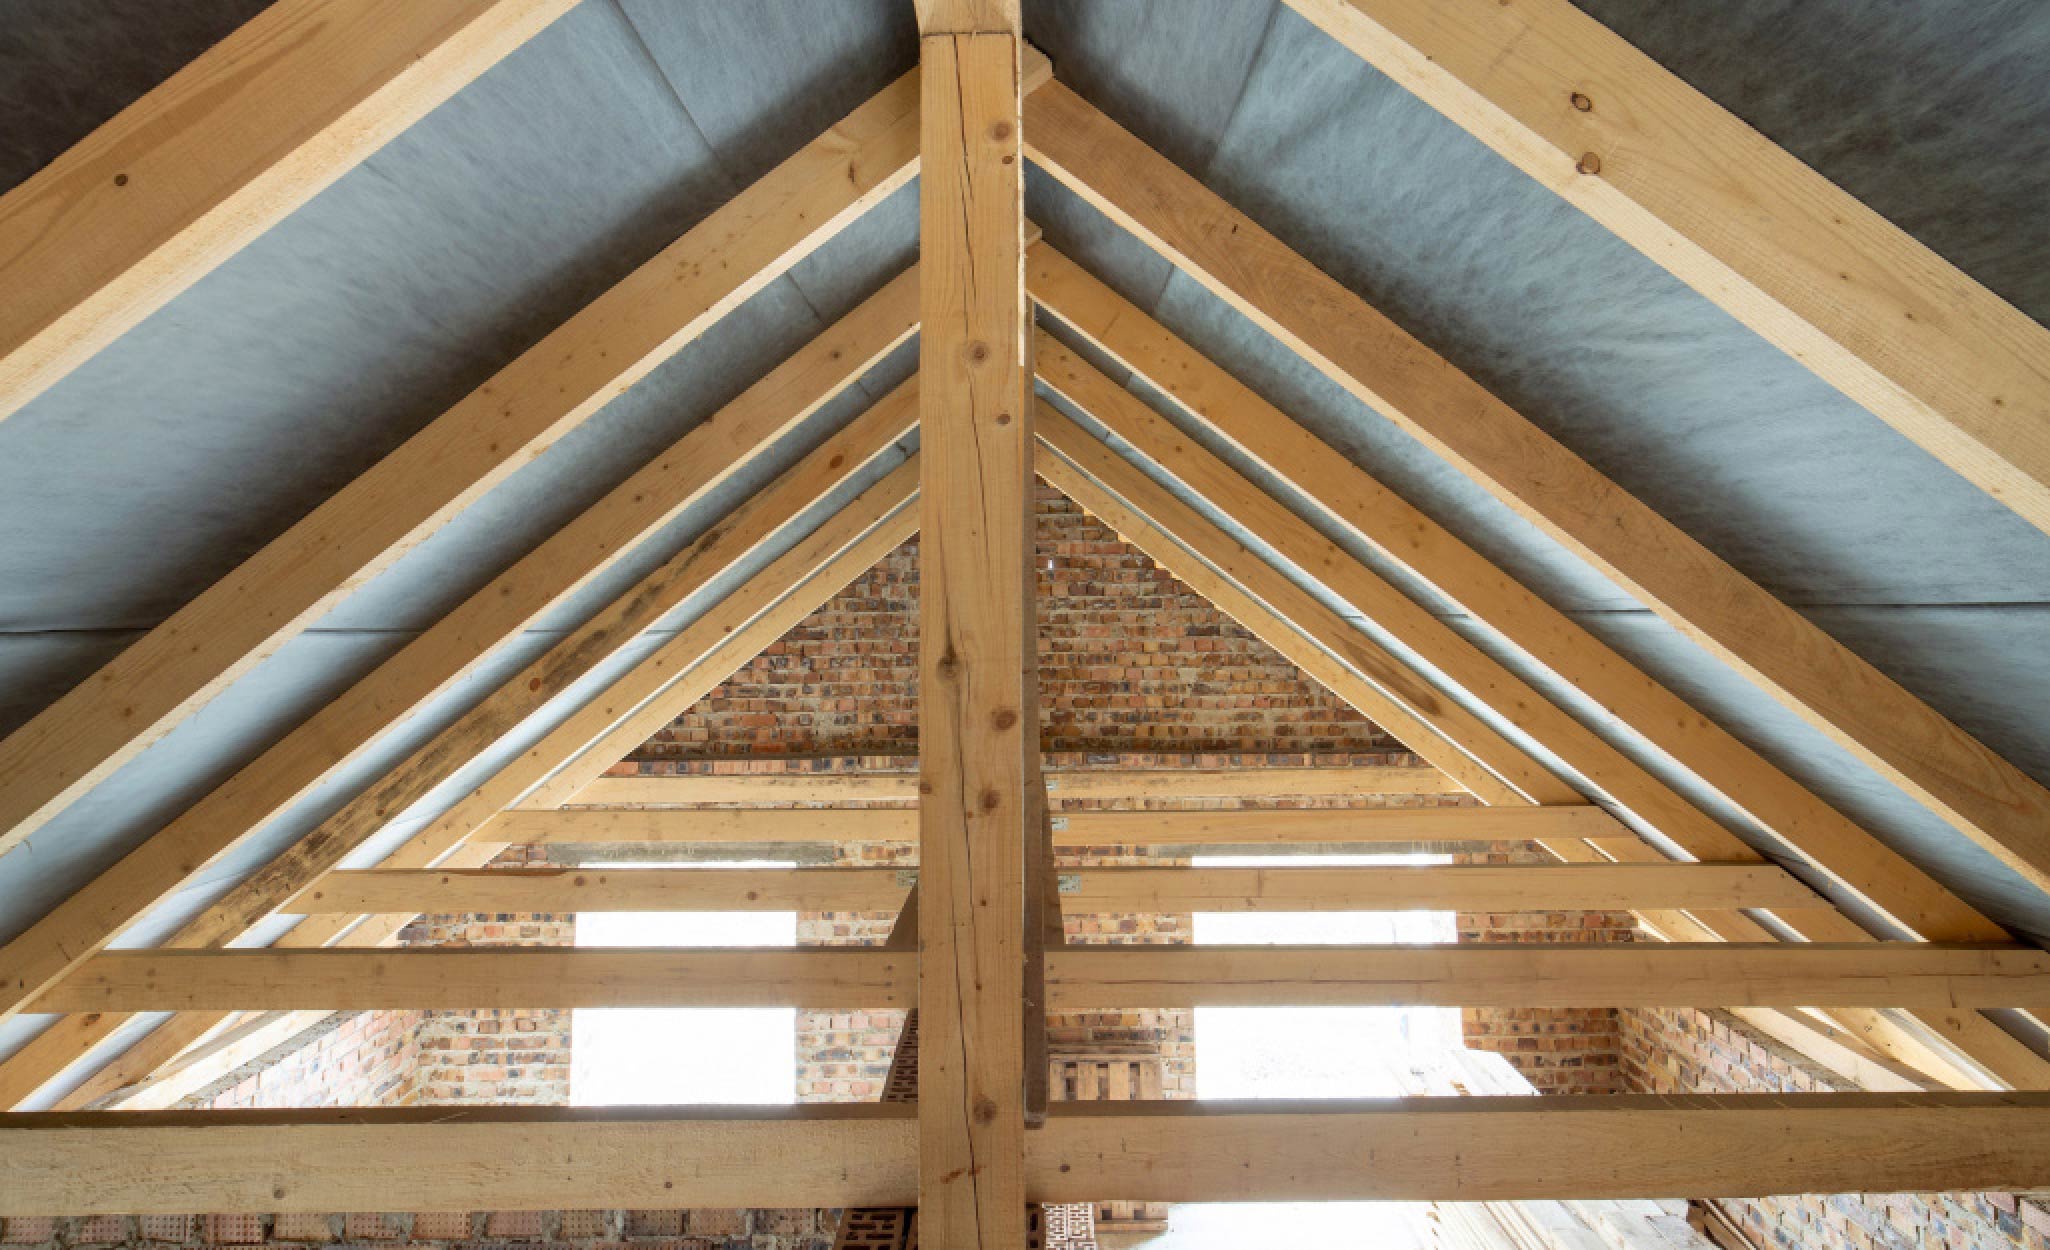 Roof rafters support an attic.